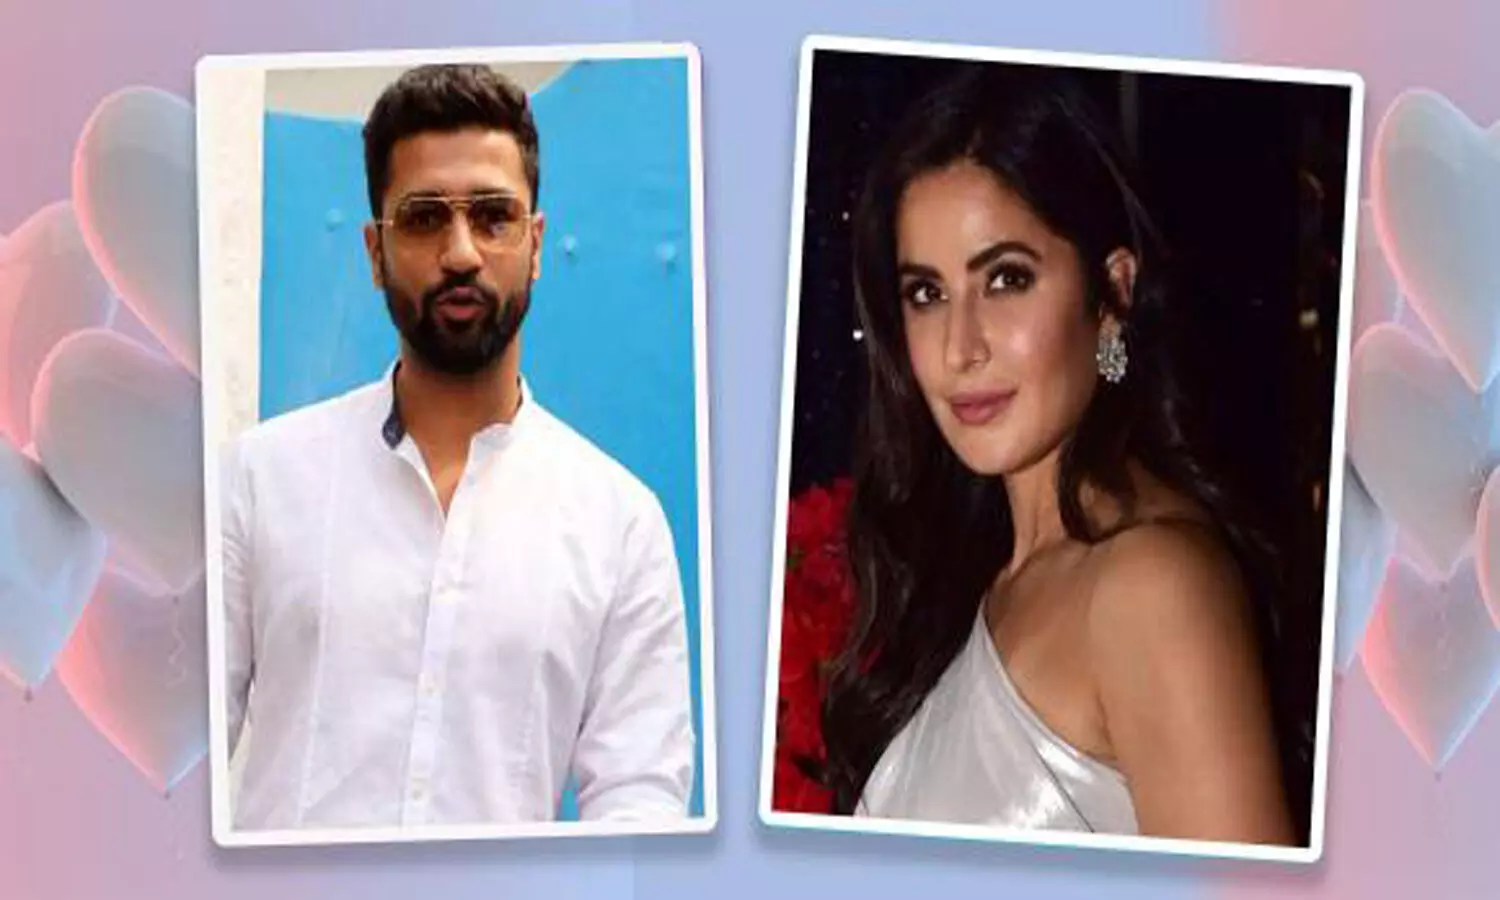 Vicky Kaushal and Katrina Kaif to soon share screen space for a project?